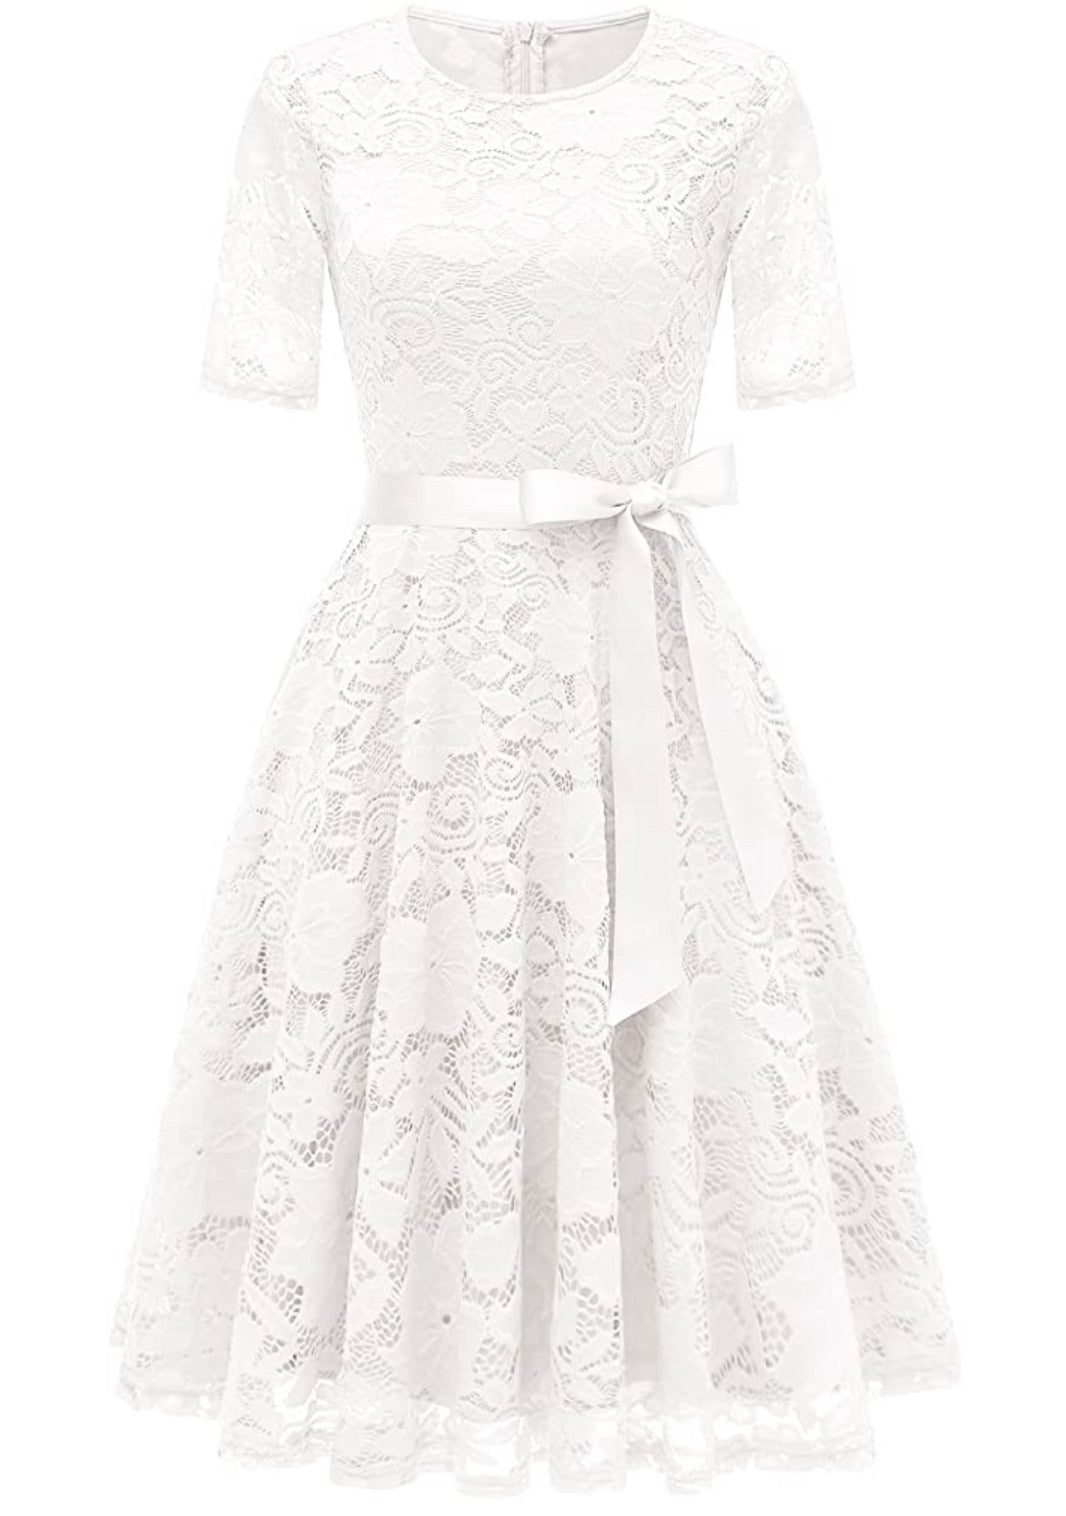 Vintage Inspired Full Lace Cocktail Dress, Sizes Small - 3XLarge (White)